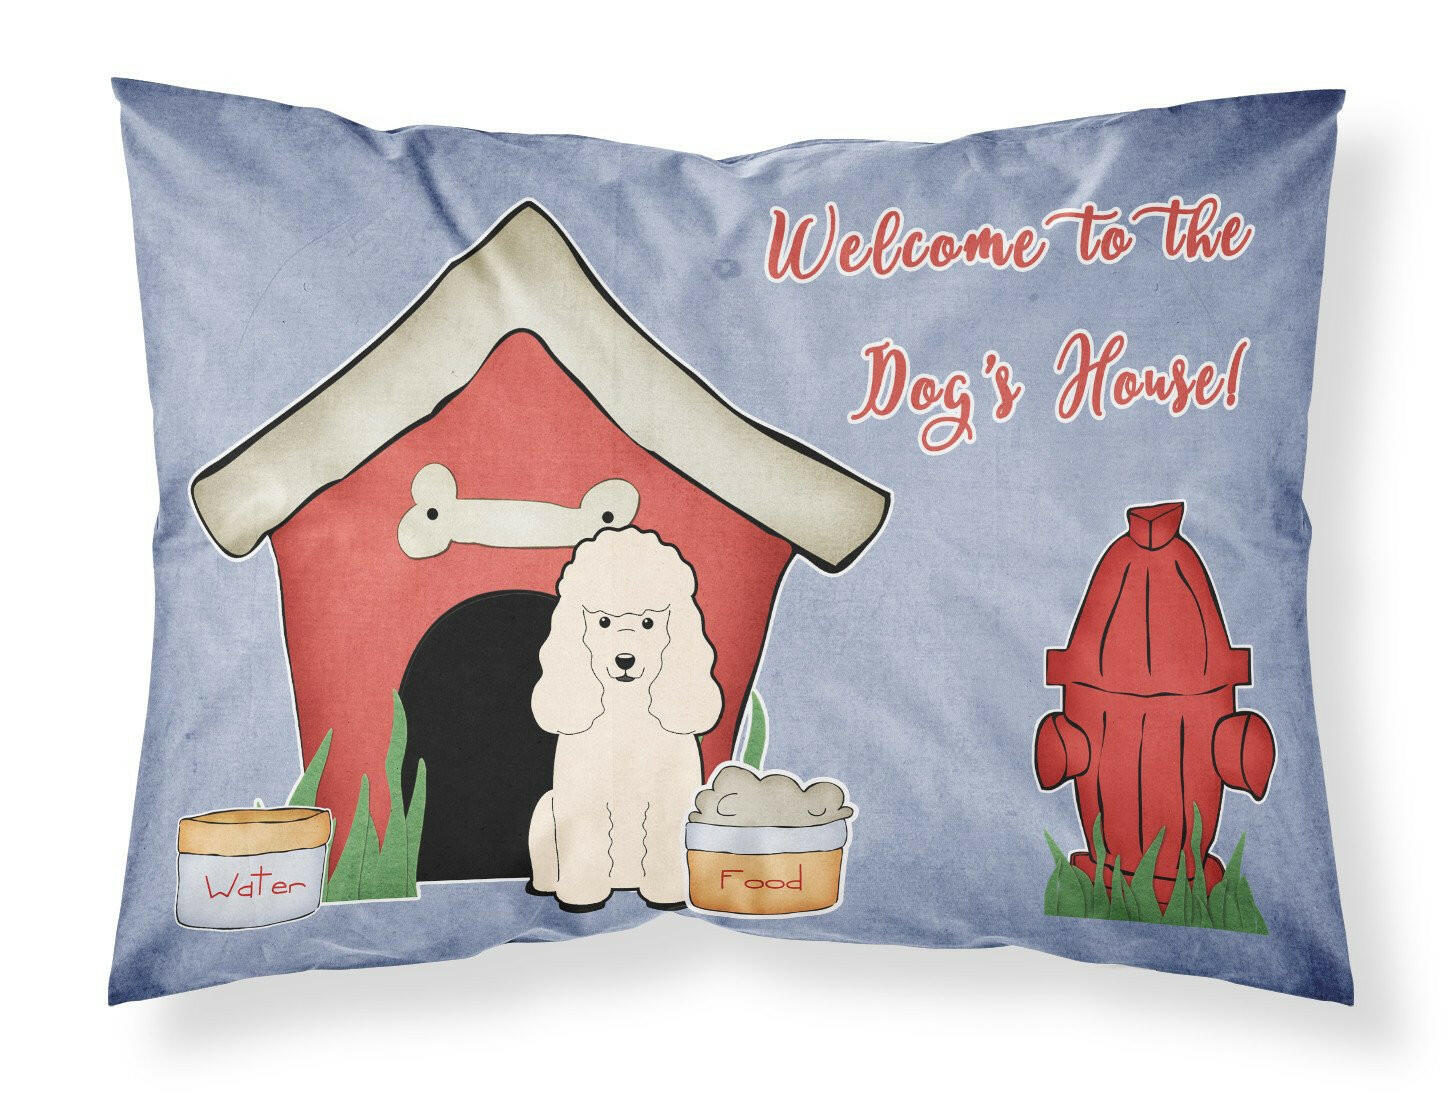 Dog House Collection Poodle White Fabric Standard Pillowcase BB2824PILLOWCASE by Caroline's Treasures